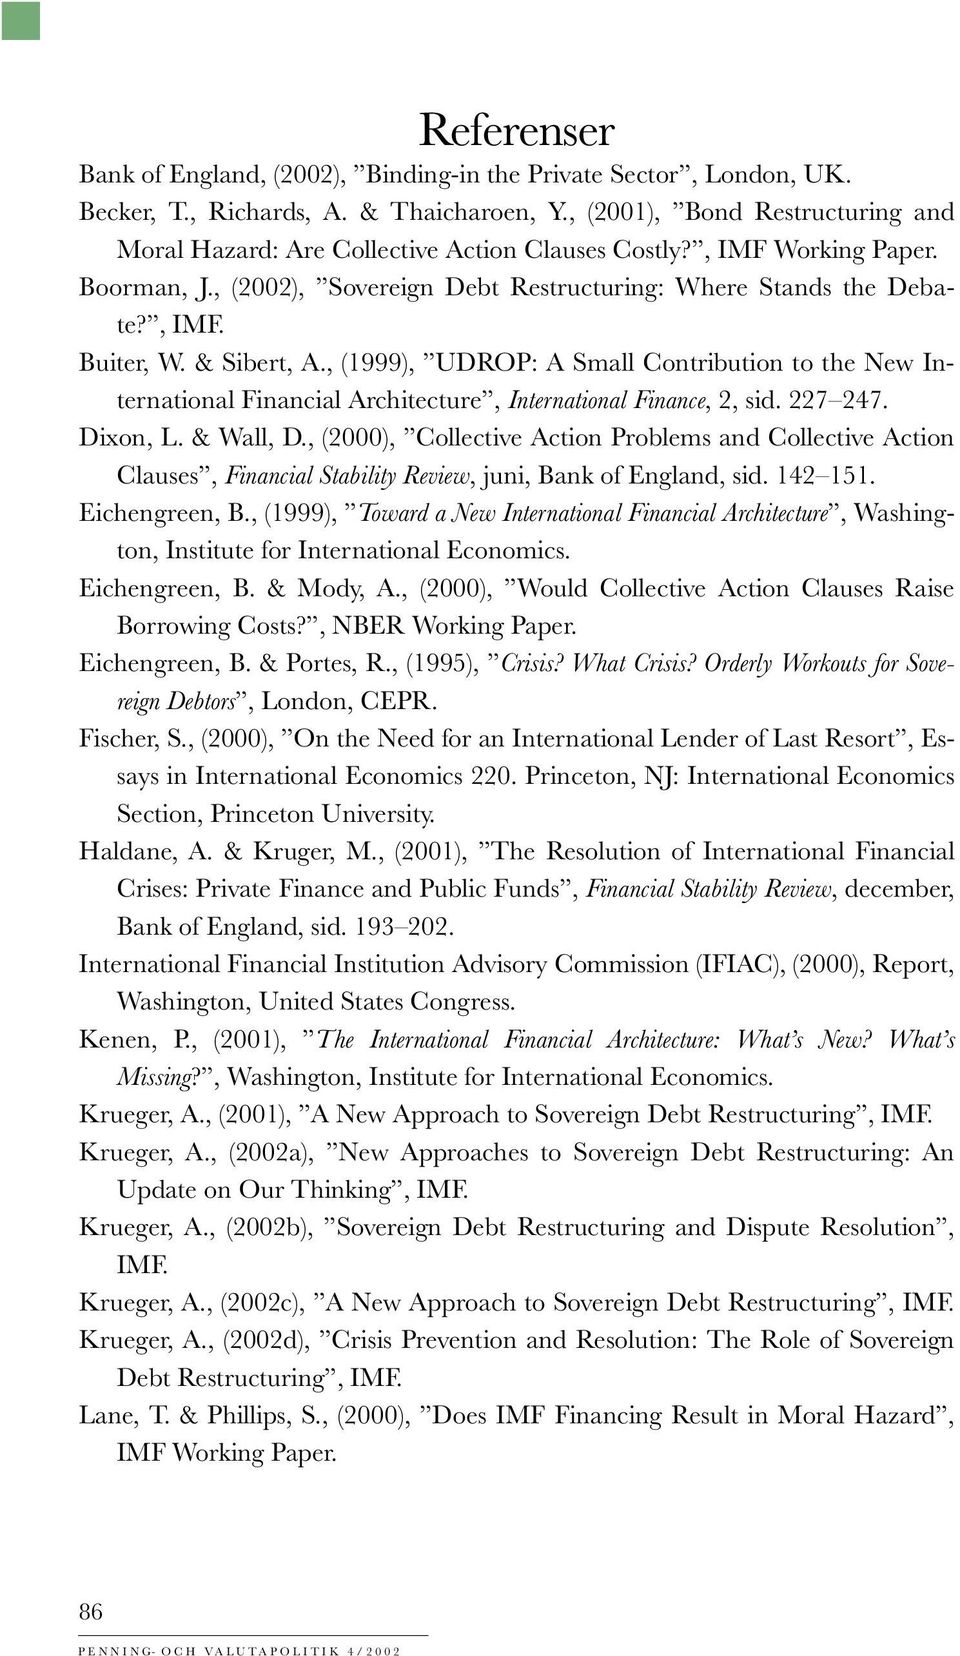 & Sibert, A., (1999), UDROP: A Small Contribution to the New International Financial Architecture, International Finance, 2, sid. 227 247. Dixon, L. & Wall, D.